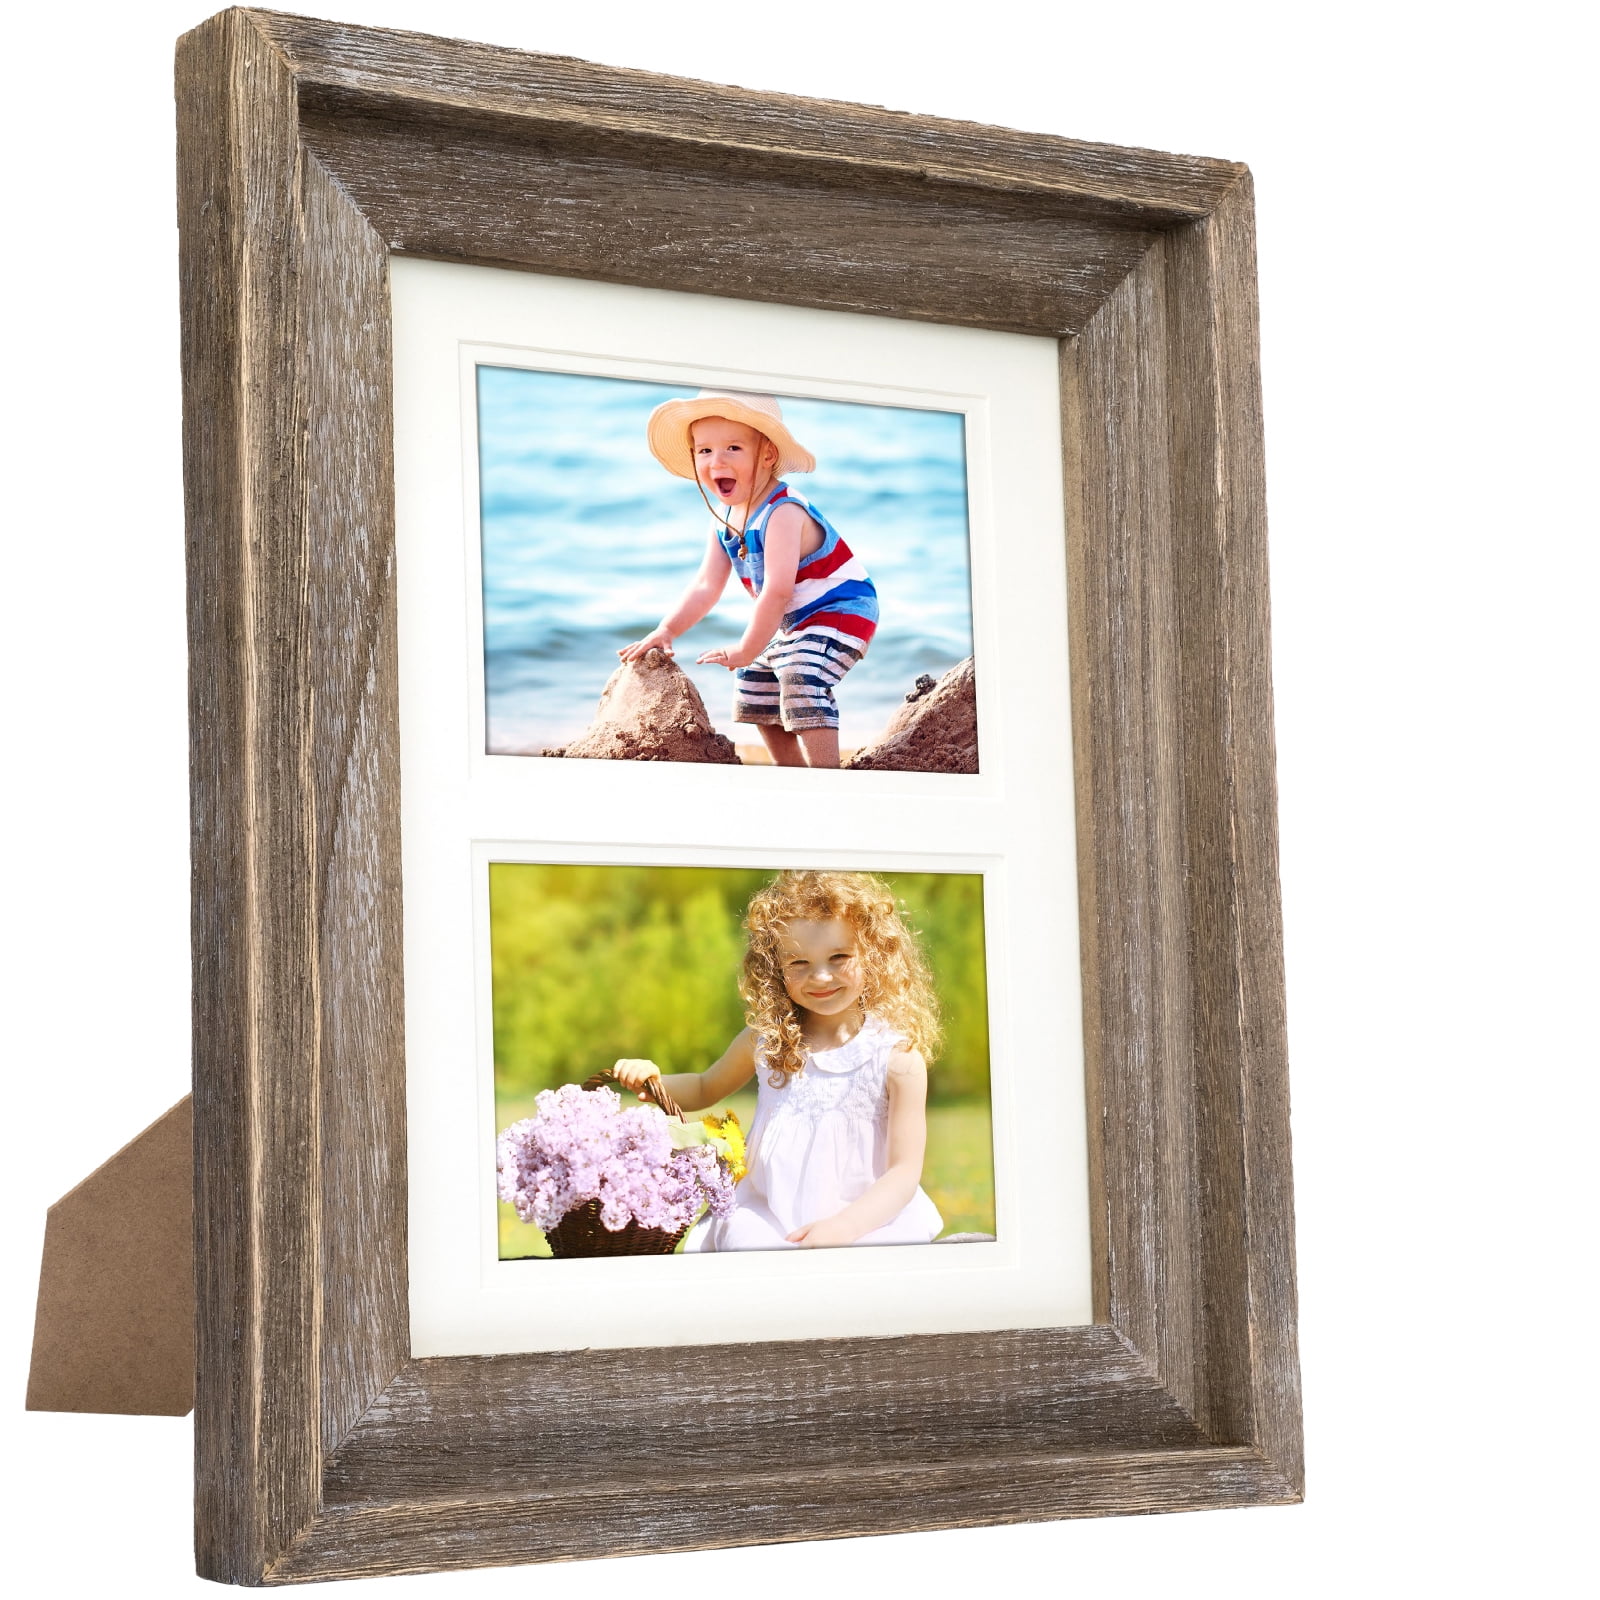 Rustic Barnwood 8x10 Picture Frame Fits 8x10 or 5x7 or 4x6 w/ Matte Pack of 2 